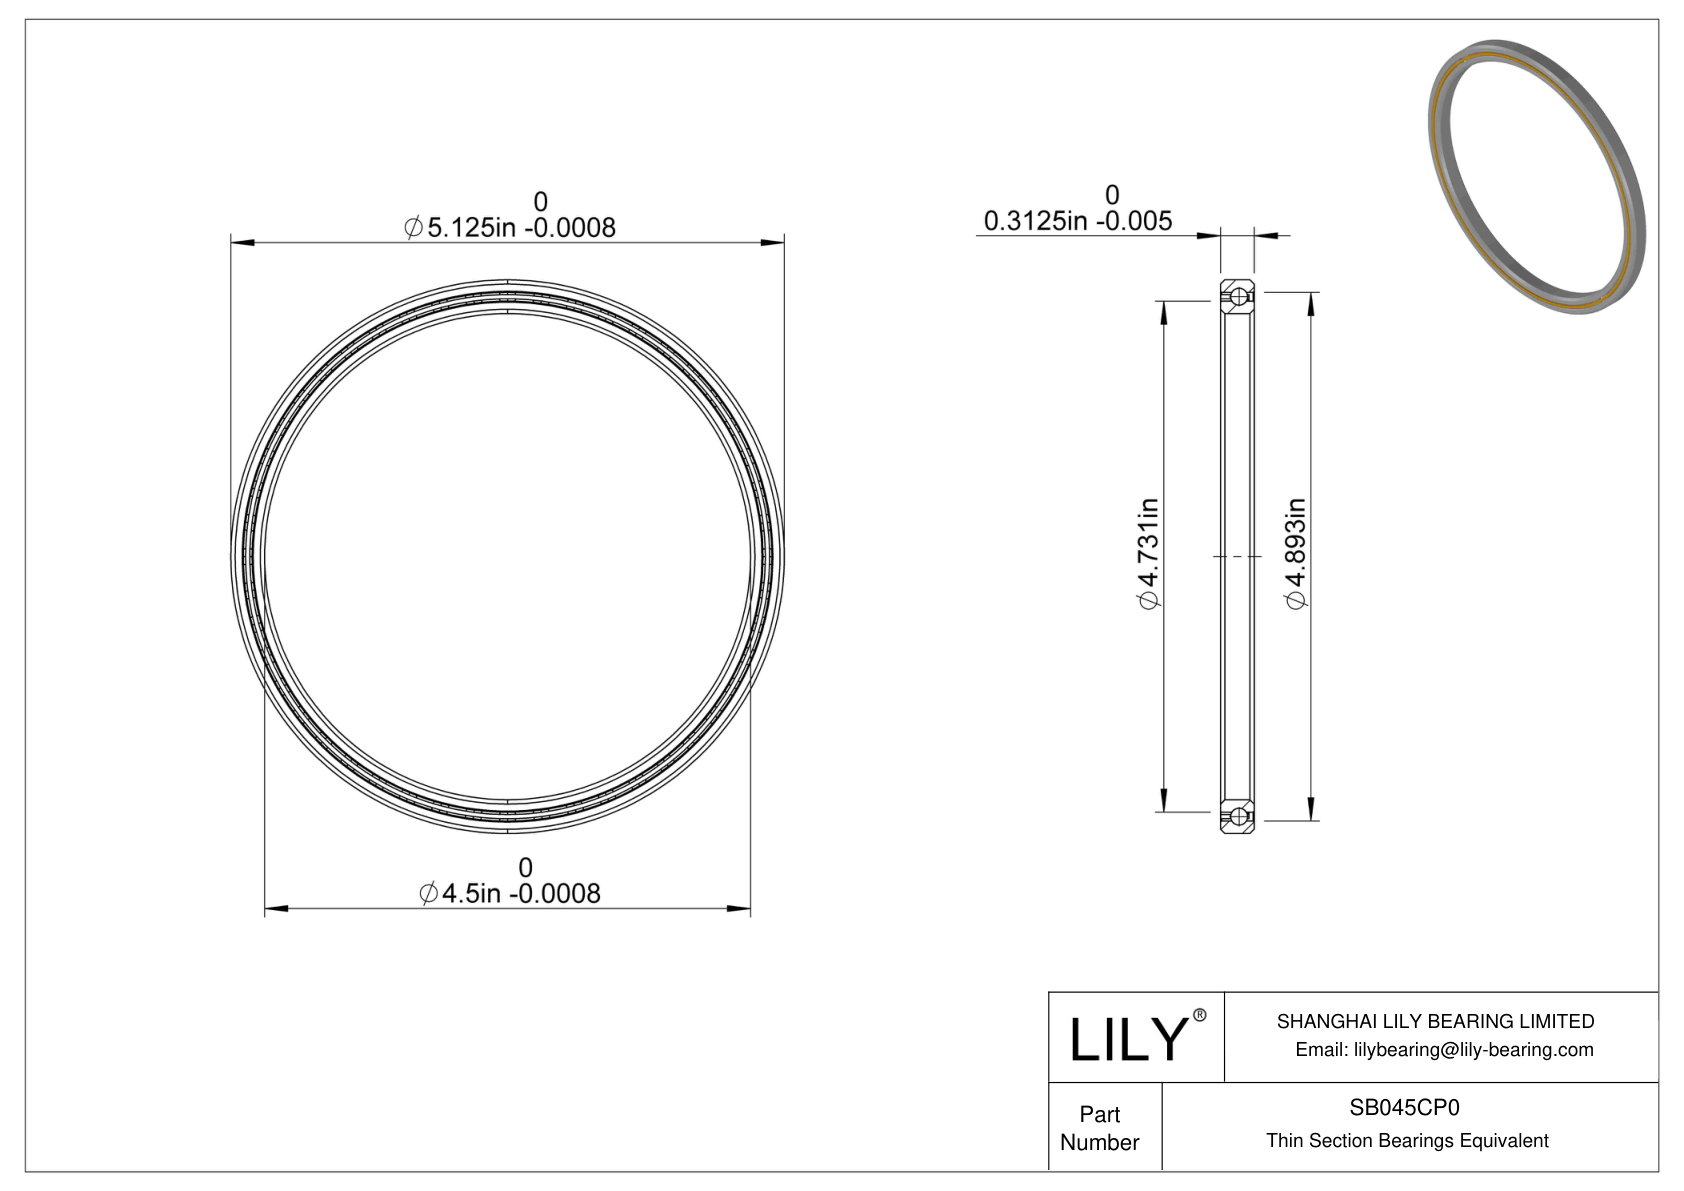 SB045CP0 Constant Section (CS) Bearings cad drawing